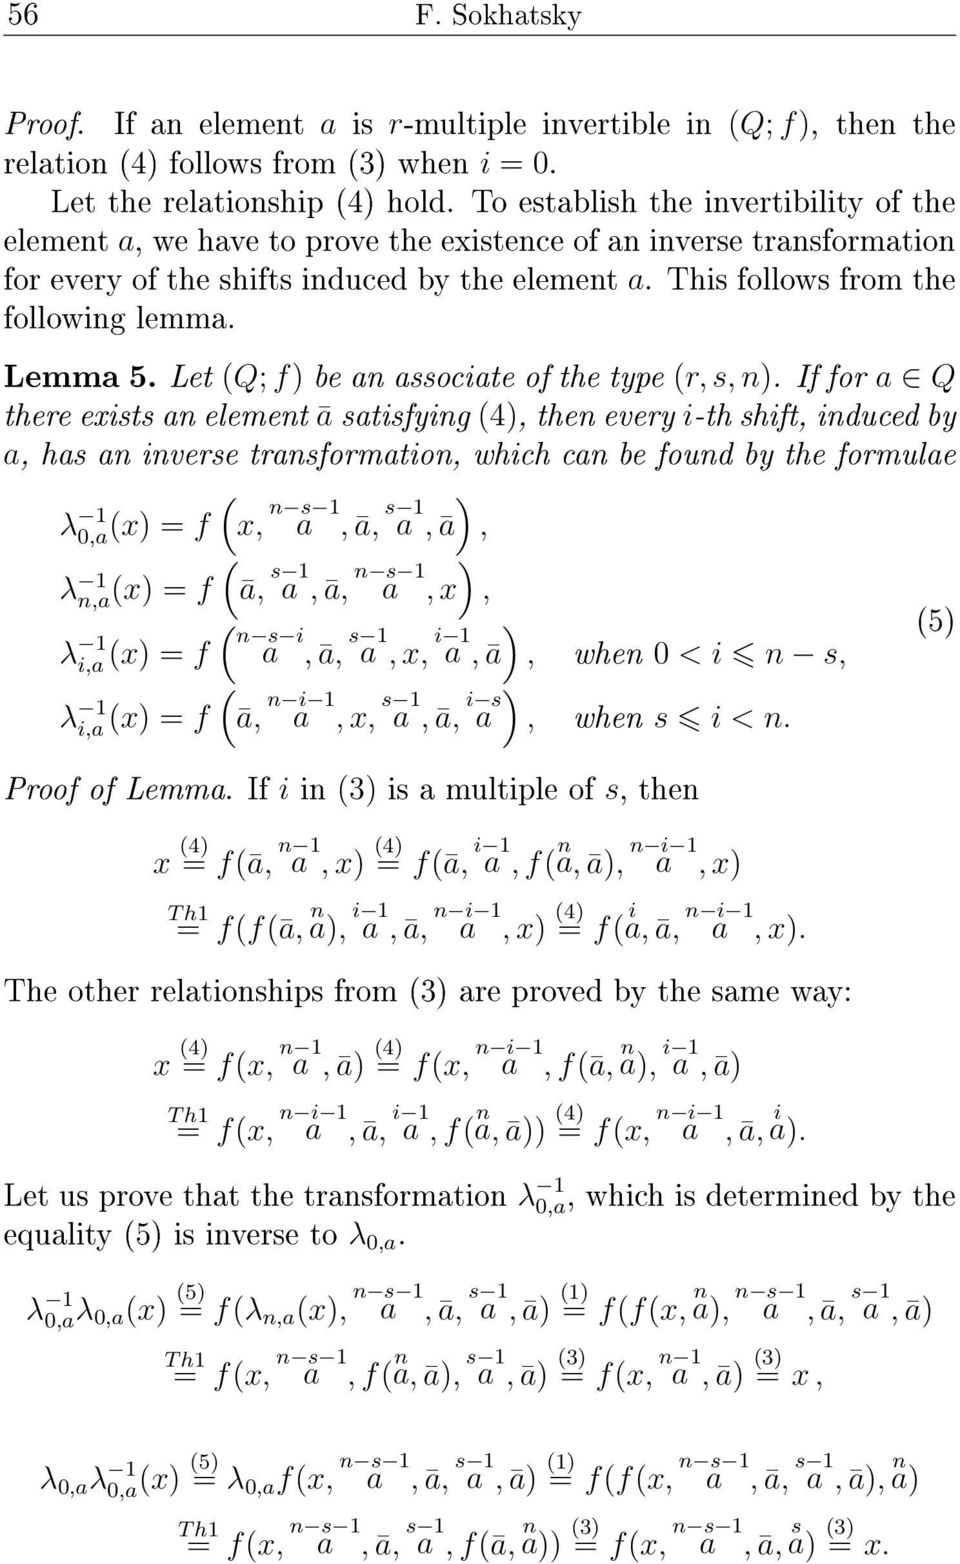 Lemma 5. Let (Q; f) be an associate of the type (r, s, n).